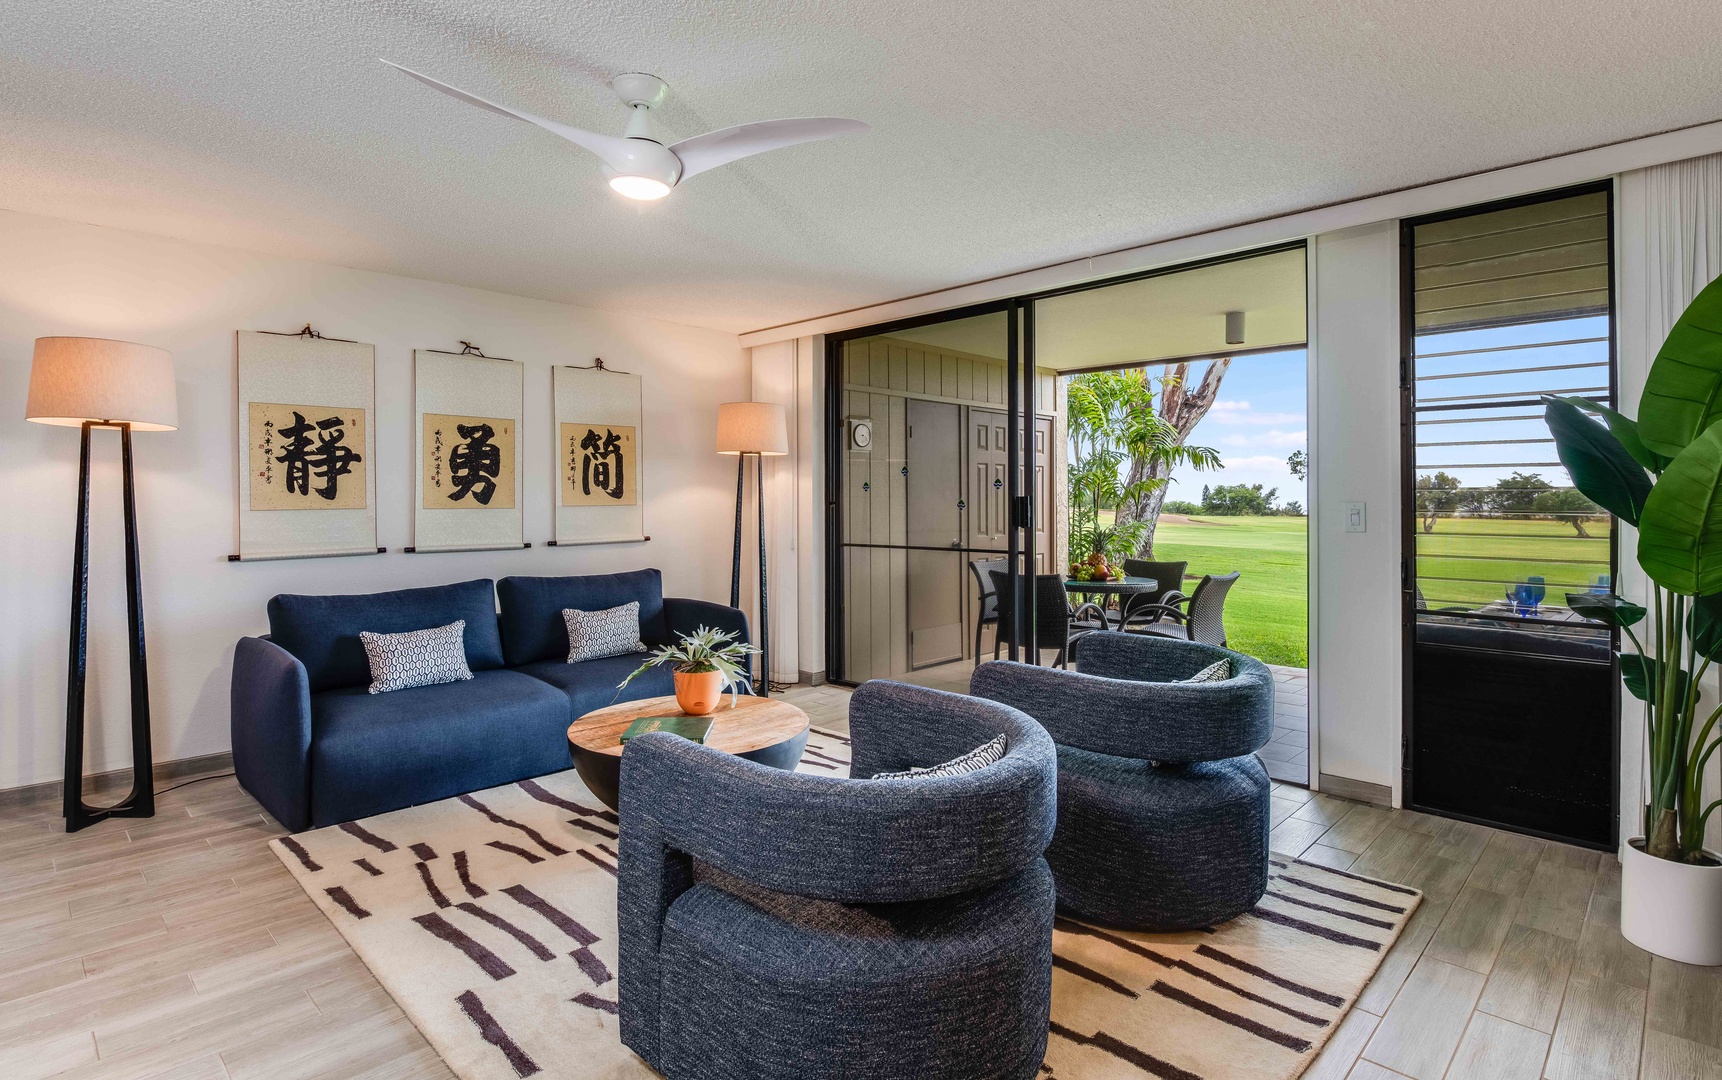 Waikoloa Vacation Rentals, Waikoloa Villas A107 - Stylish Swivel Chairs in Living Room Perfect for Socializing, Watching TV or Catching Sunset!